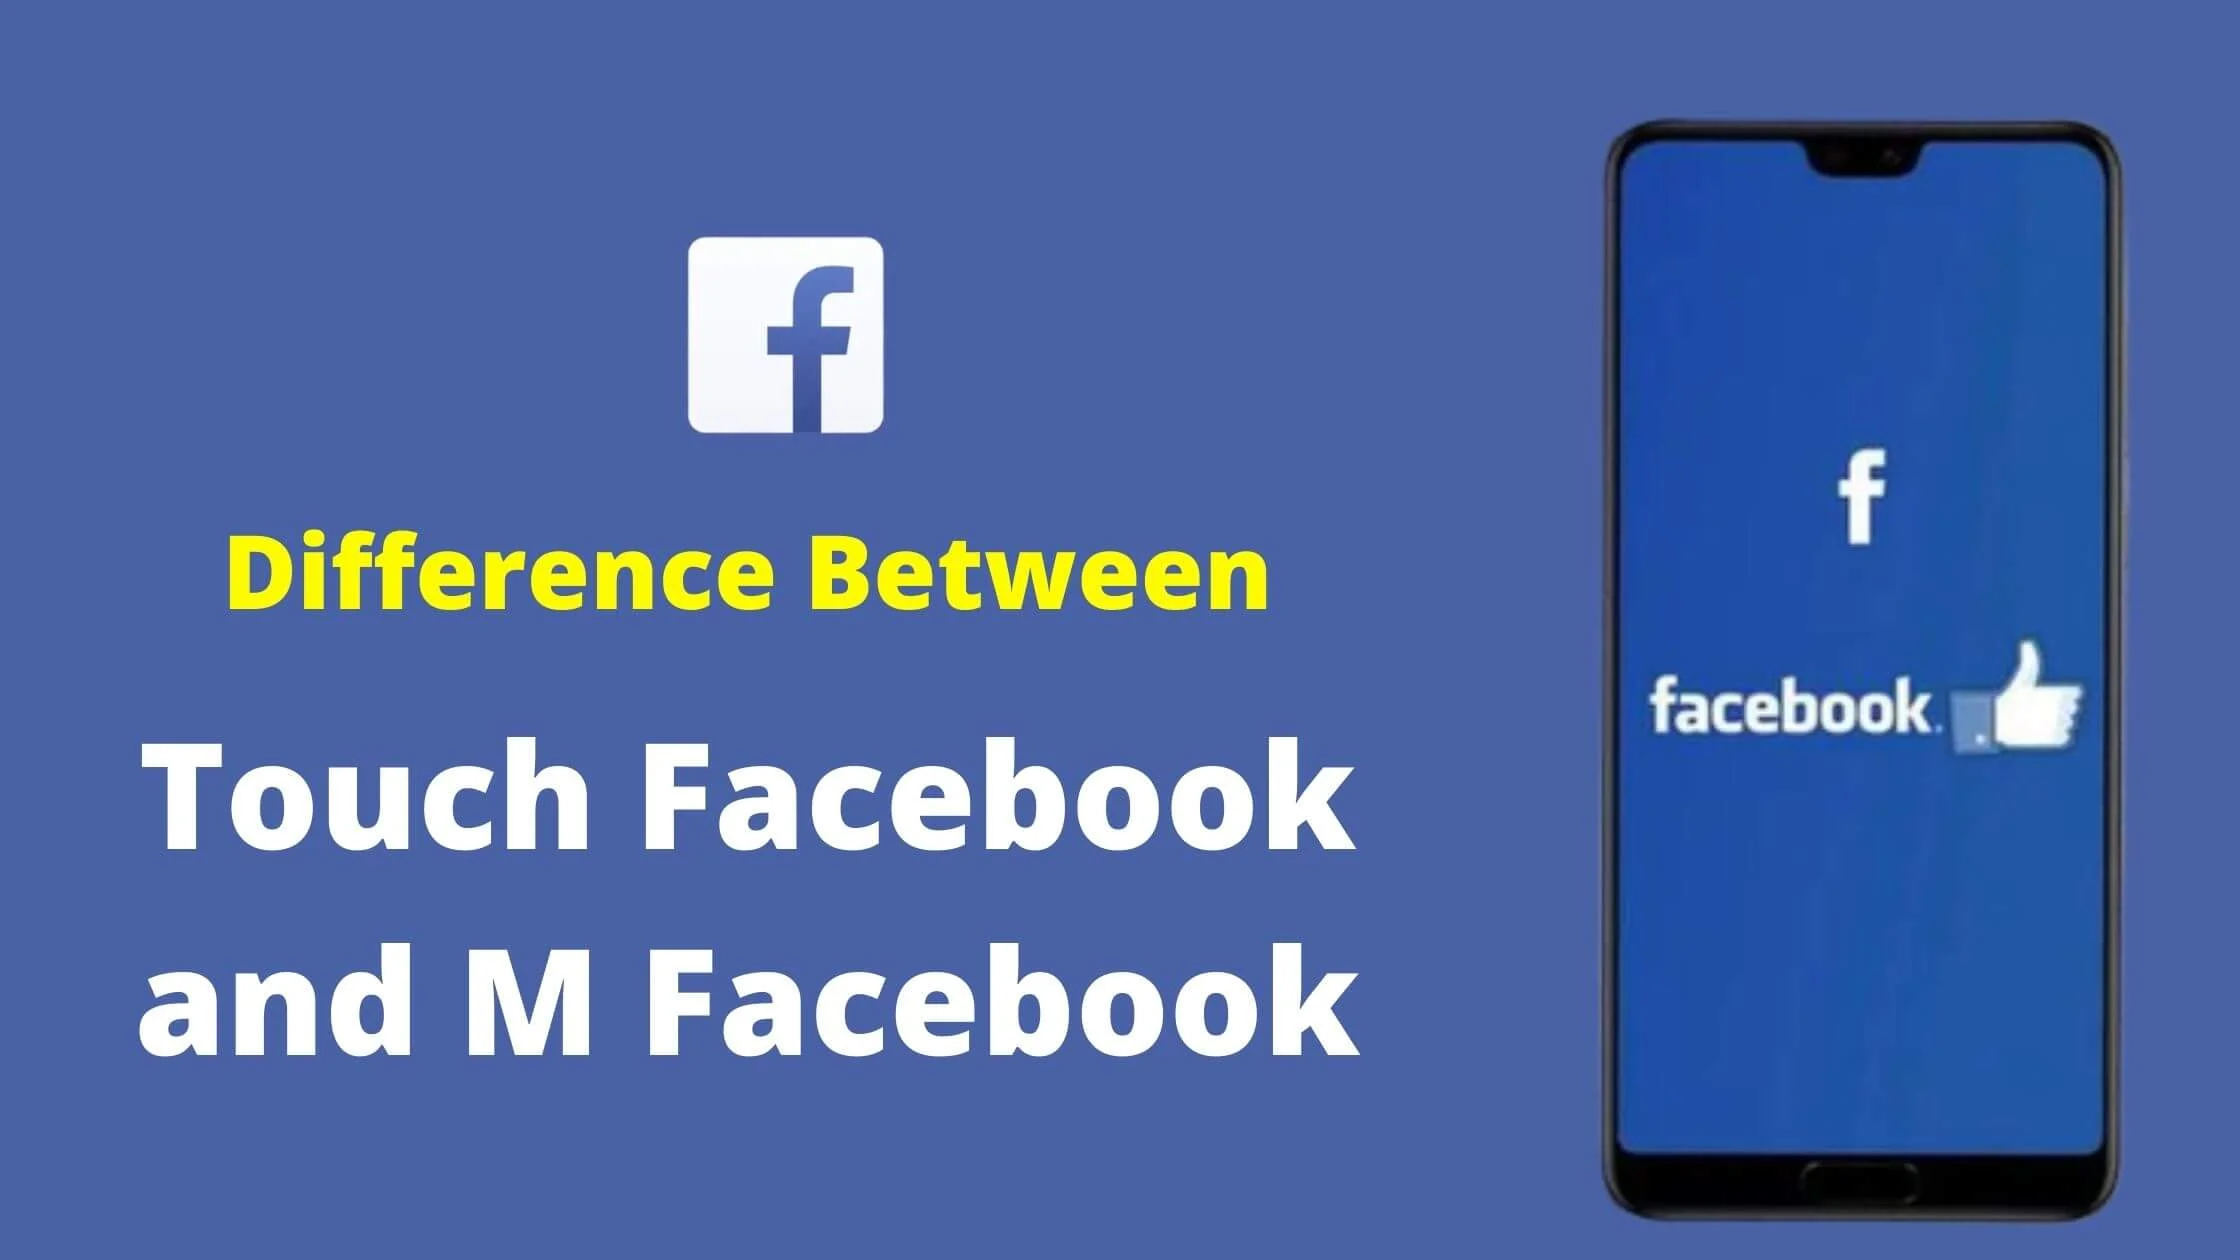 Difference Between Touch Facebook and M Facebook